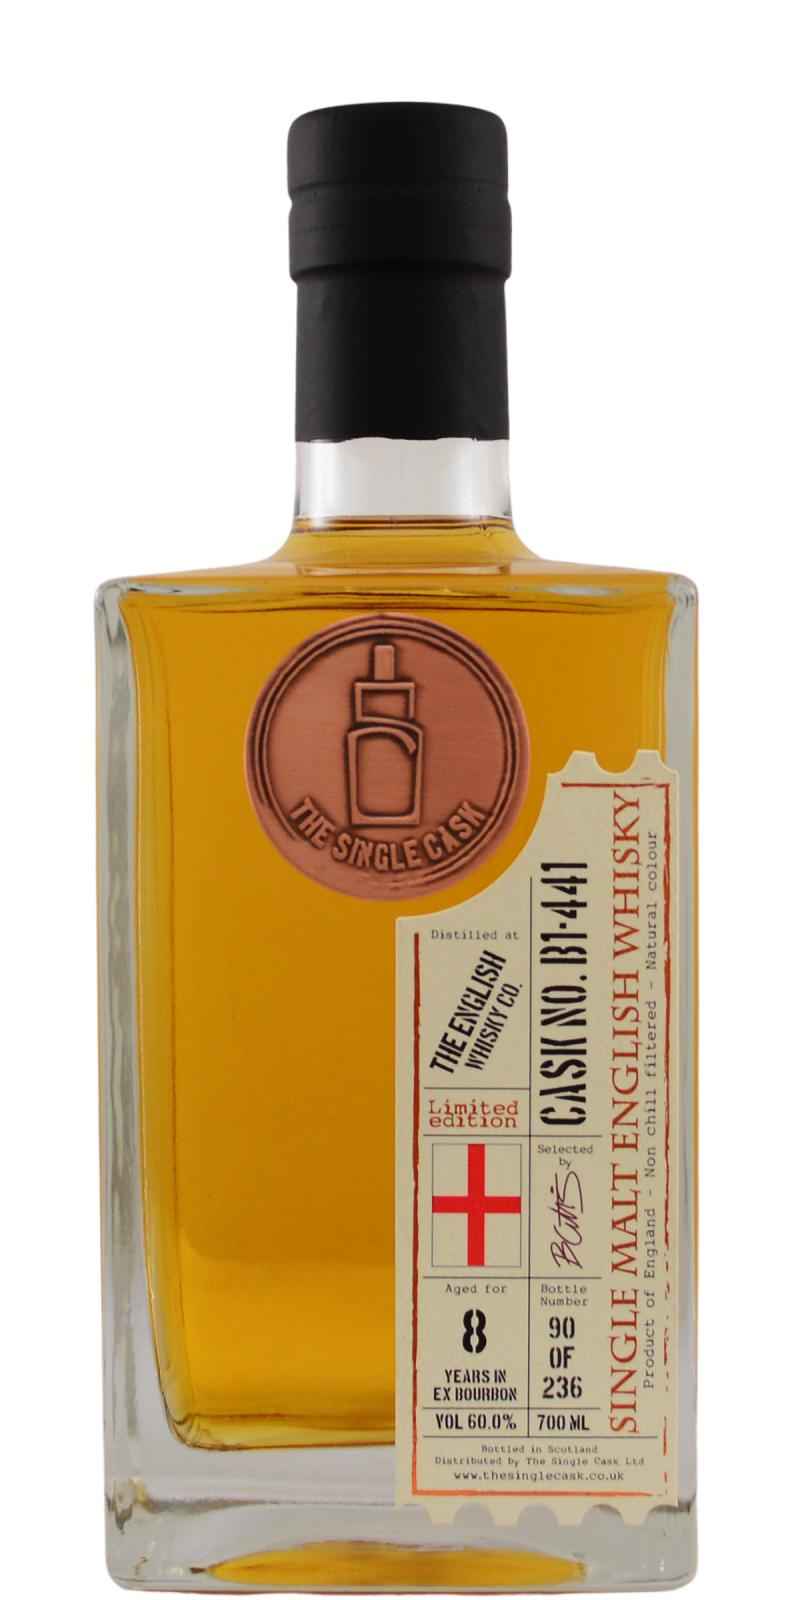 The English Whisky 08-year-old TSCL